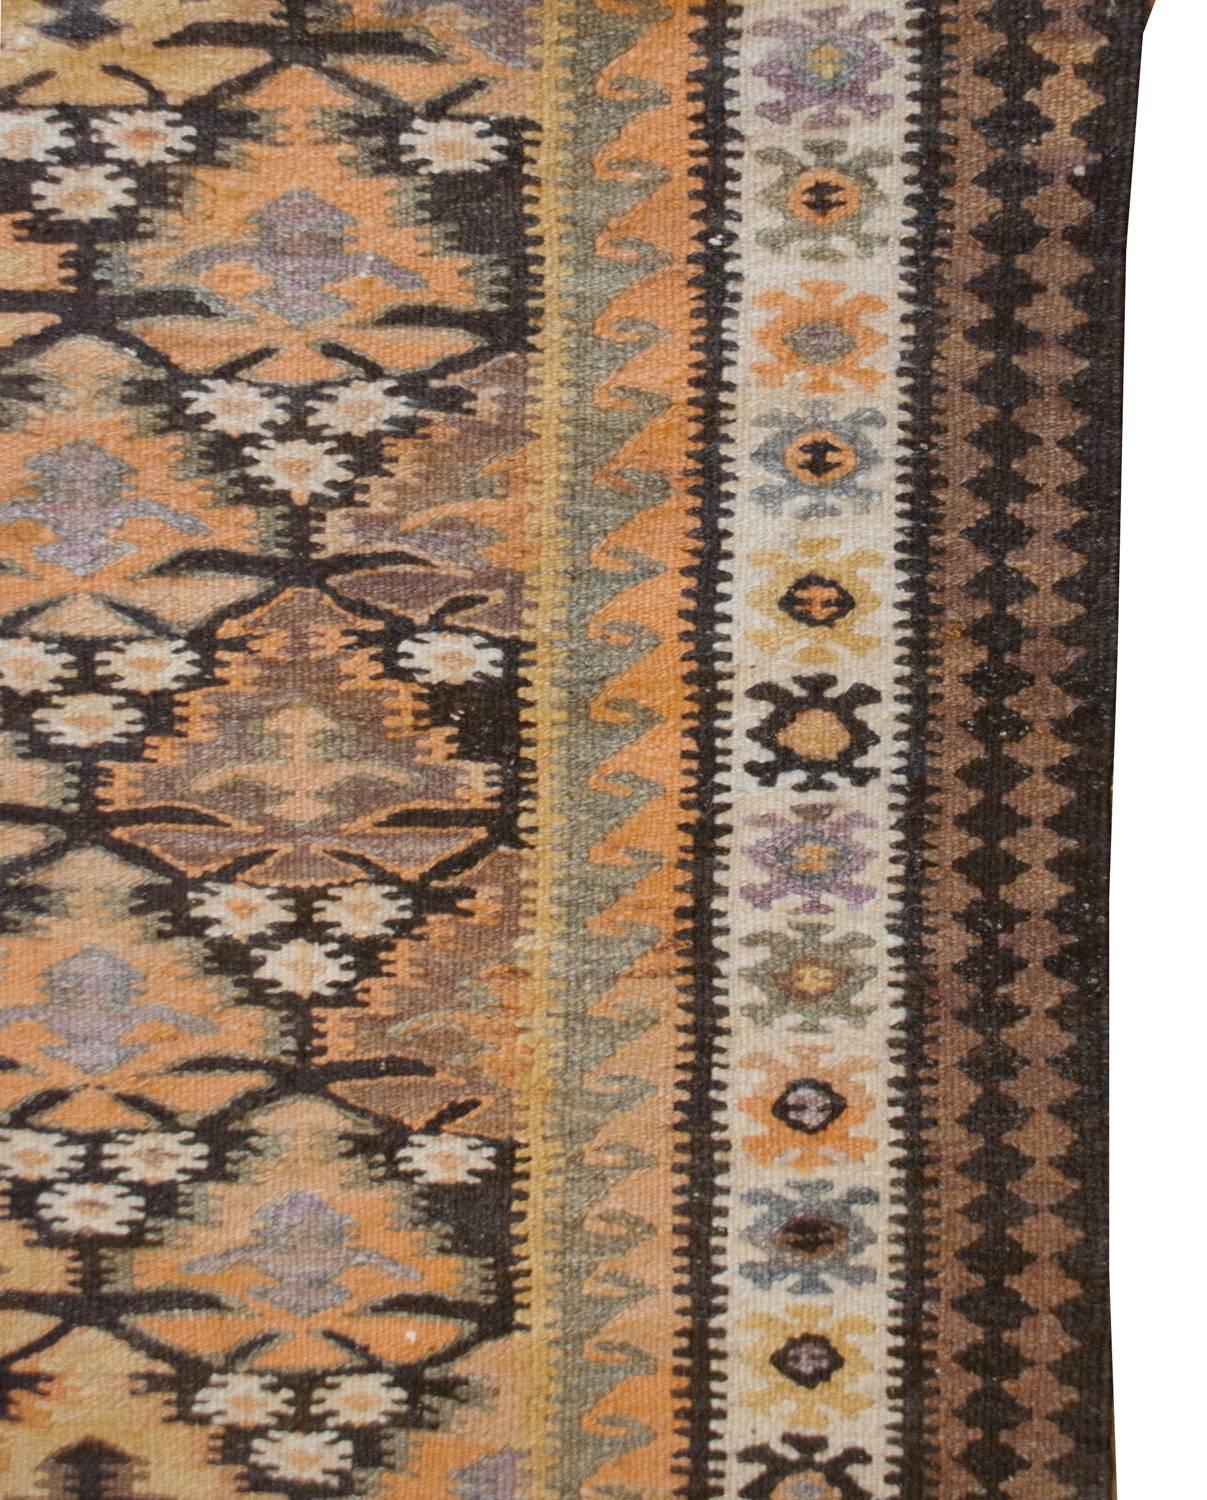 A wonderful early 20th century Persian Qazvin Kilim rug with a beautiful stylized multicolored tree-of-life patterned field woven with incredible natural vegetable dyed wool. The border is exquisite, with alternating zigzag and stylized floral